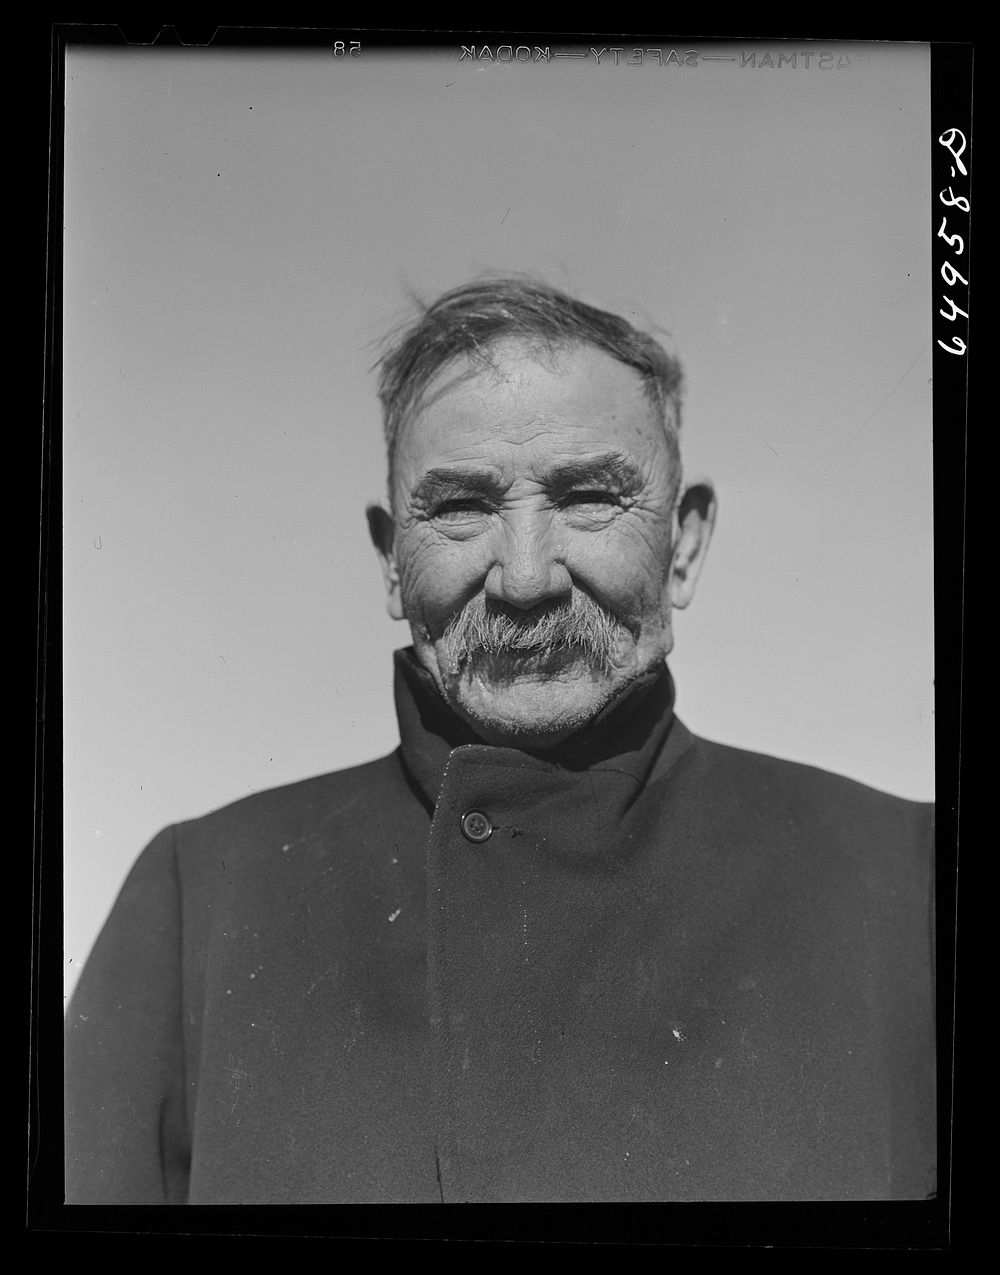 Valley County, Montana. Eighty-seven year old homesteader. Sourced from the Library of Congress.